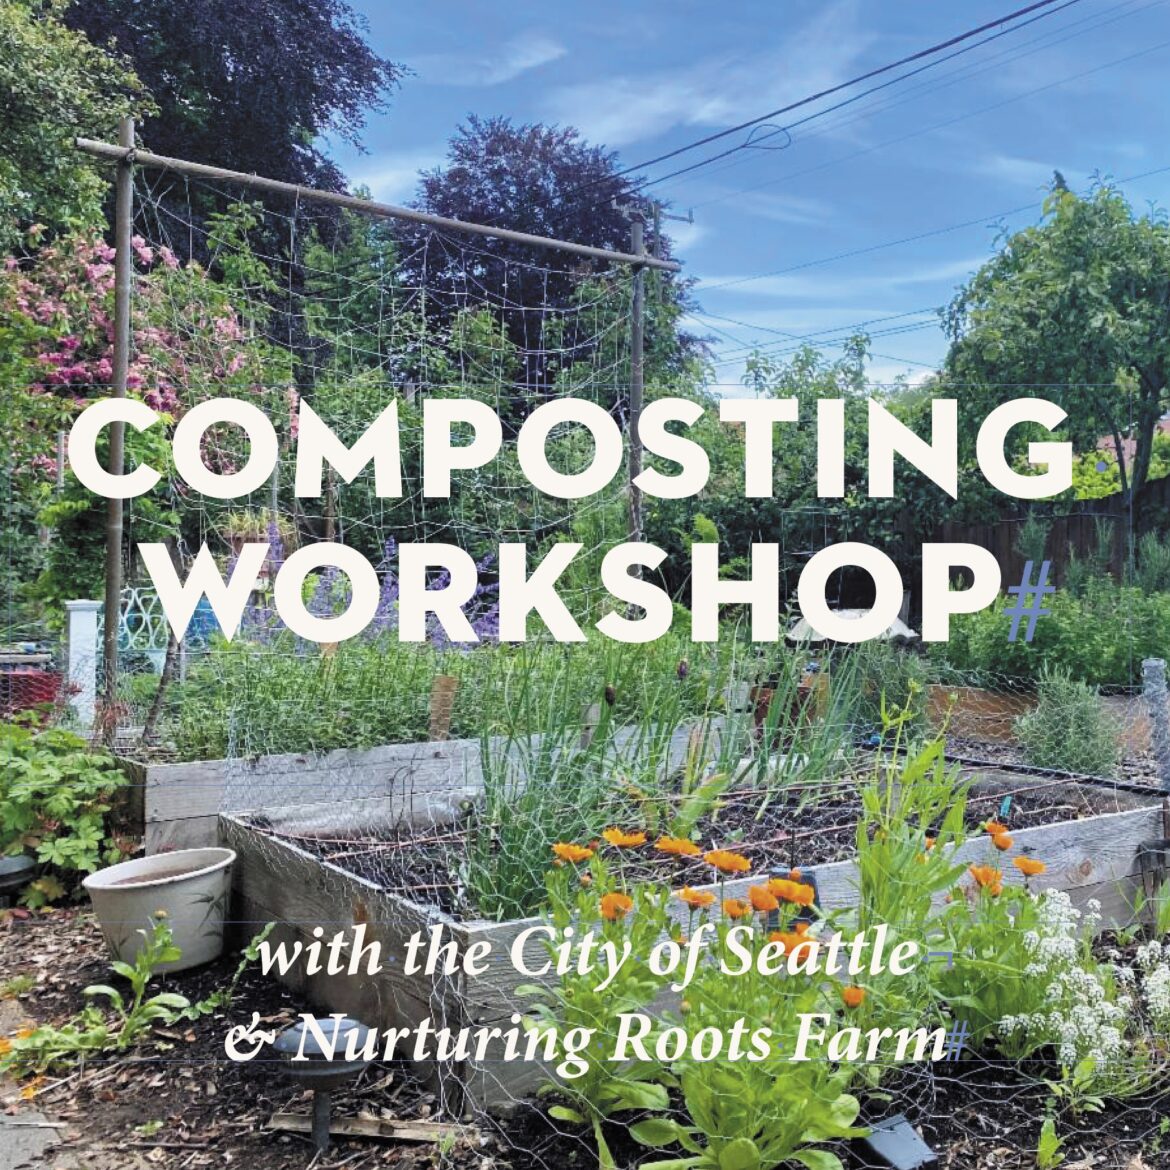 Composting Workshop with the City of Seattle and Nurturing Roots